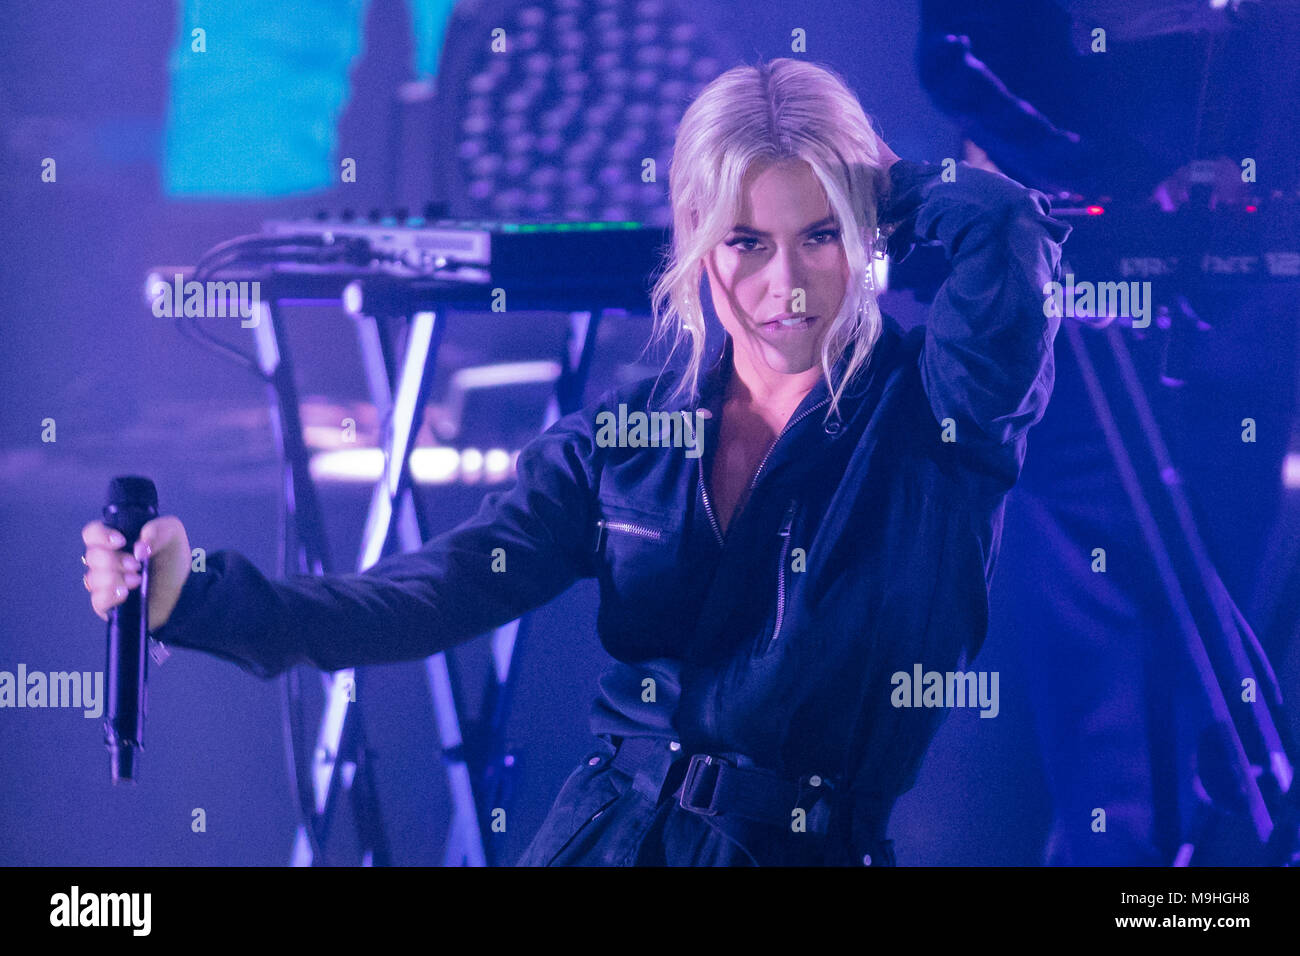 Norway, Oslo - February 25, 2018. The Norwegian DJ and record producer Alan Walker performs a live concert at Oslo Konserthus during the Norwegian Grammy Awards, Spellemannprisen 2017, in Oslo. Here the Norwegian singer Julie Bergan makes a guest appearance. (Photo credit: Gonzales Photo - Stian S. Moller). Stock Photo